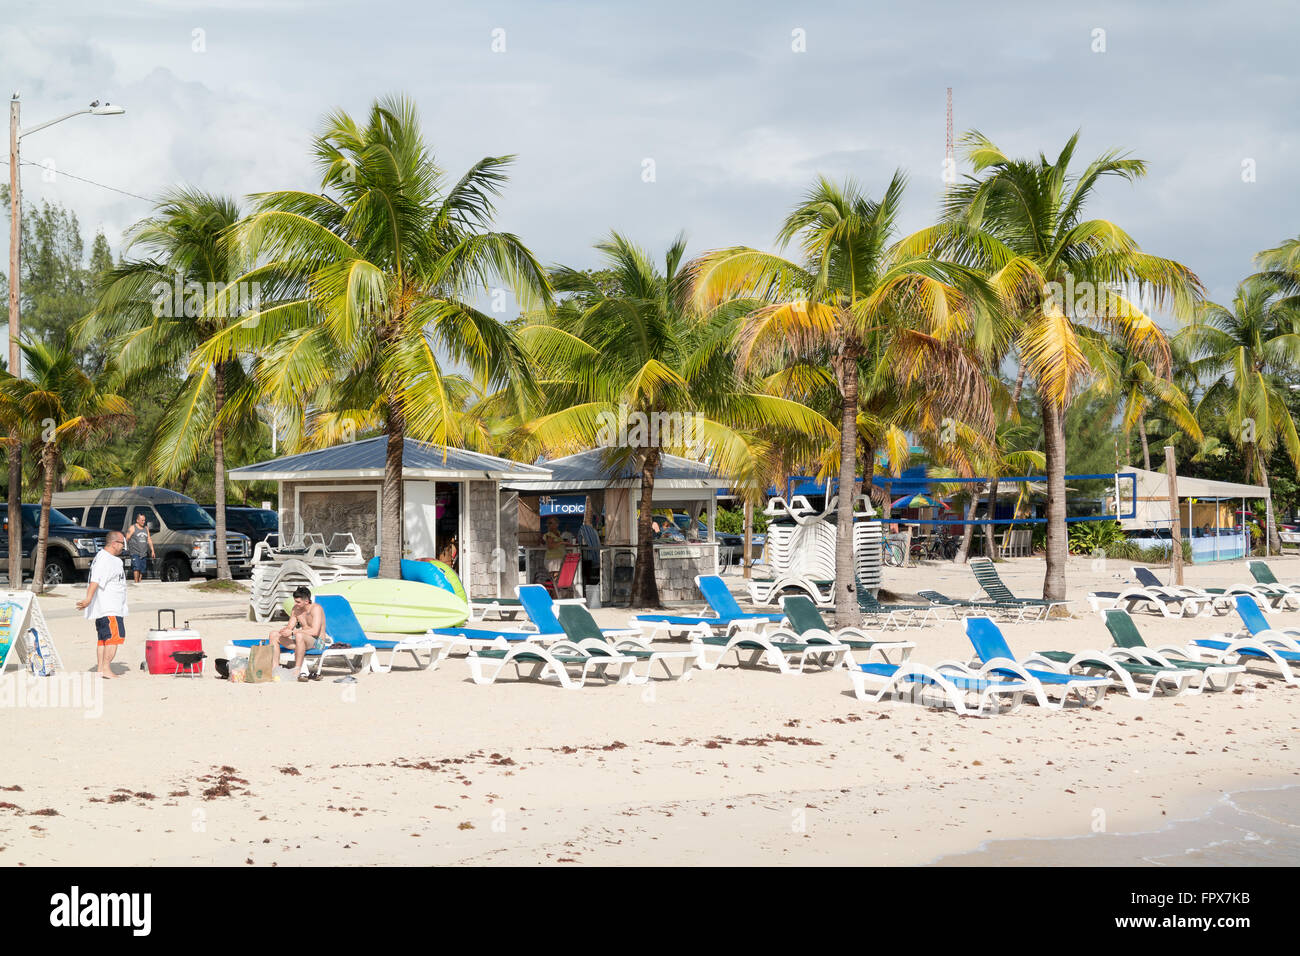 People and pavilions on Higgs Beach at south coast of Key West, Florida Keys, USA Stock Photo